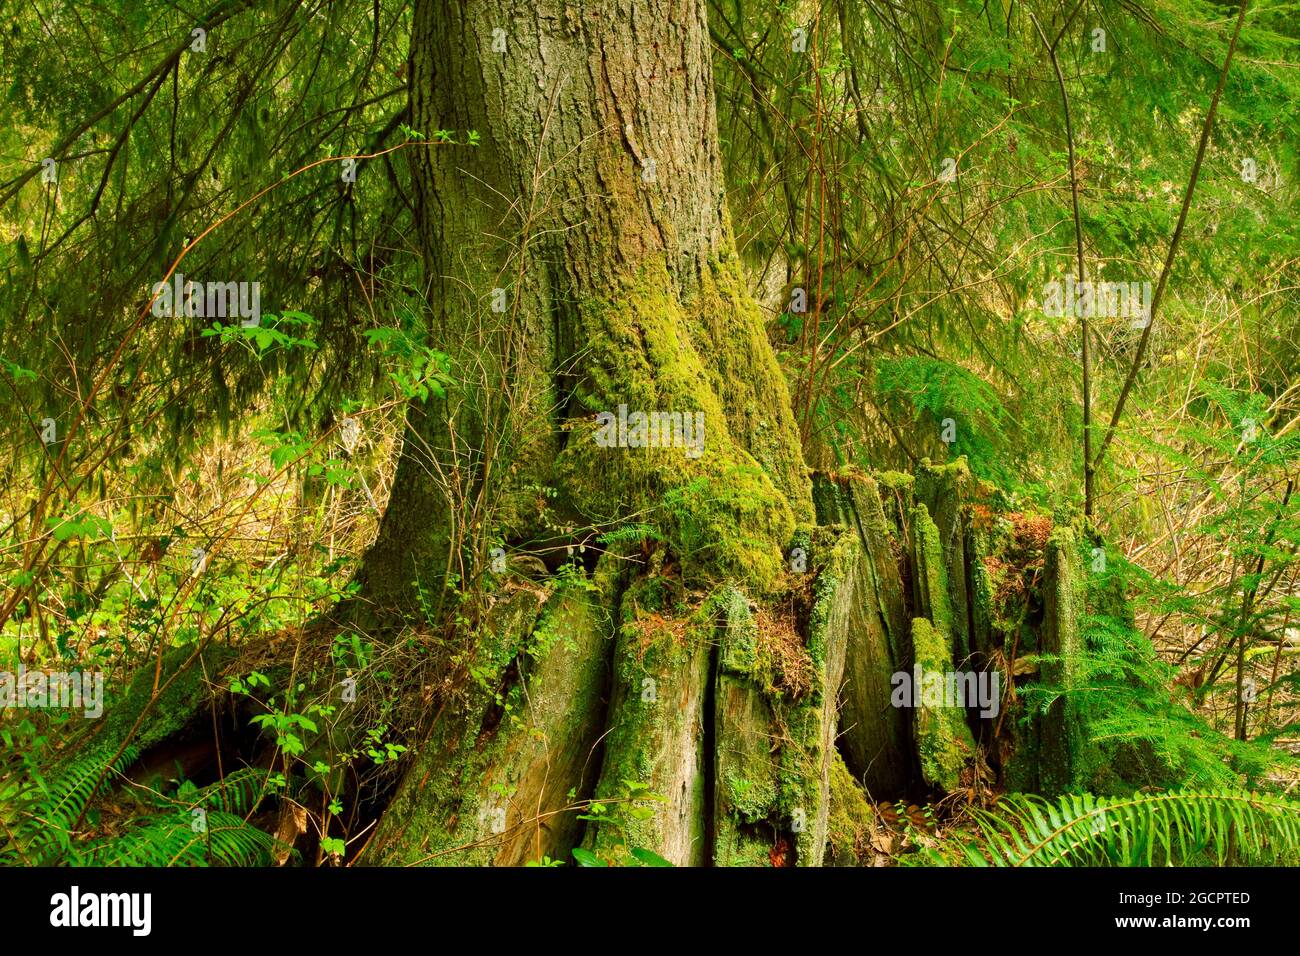 a exterior picture of an Pacific Northwest rainforest with Western hemlock trees Stock Photo